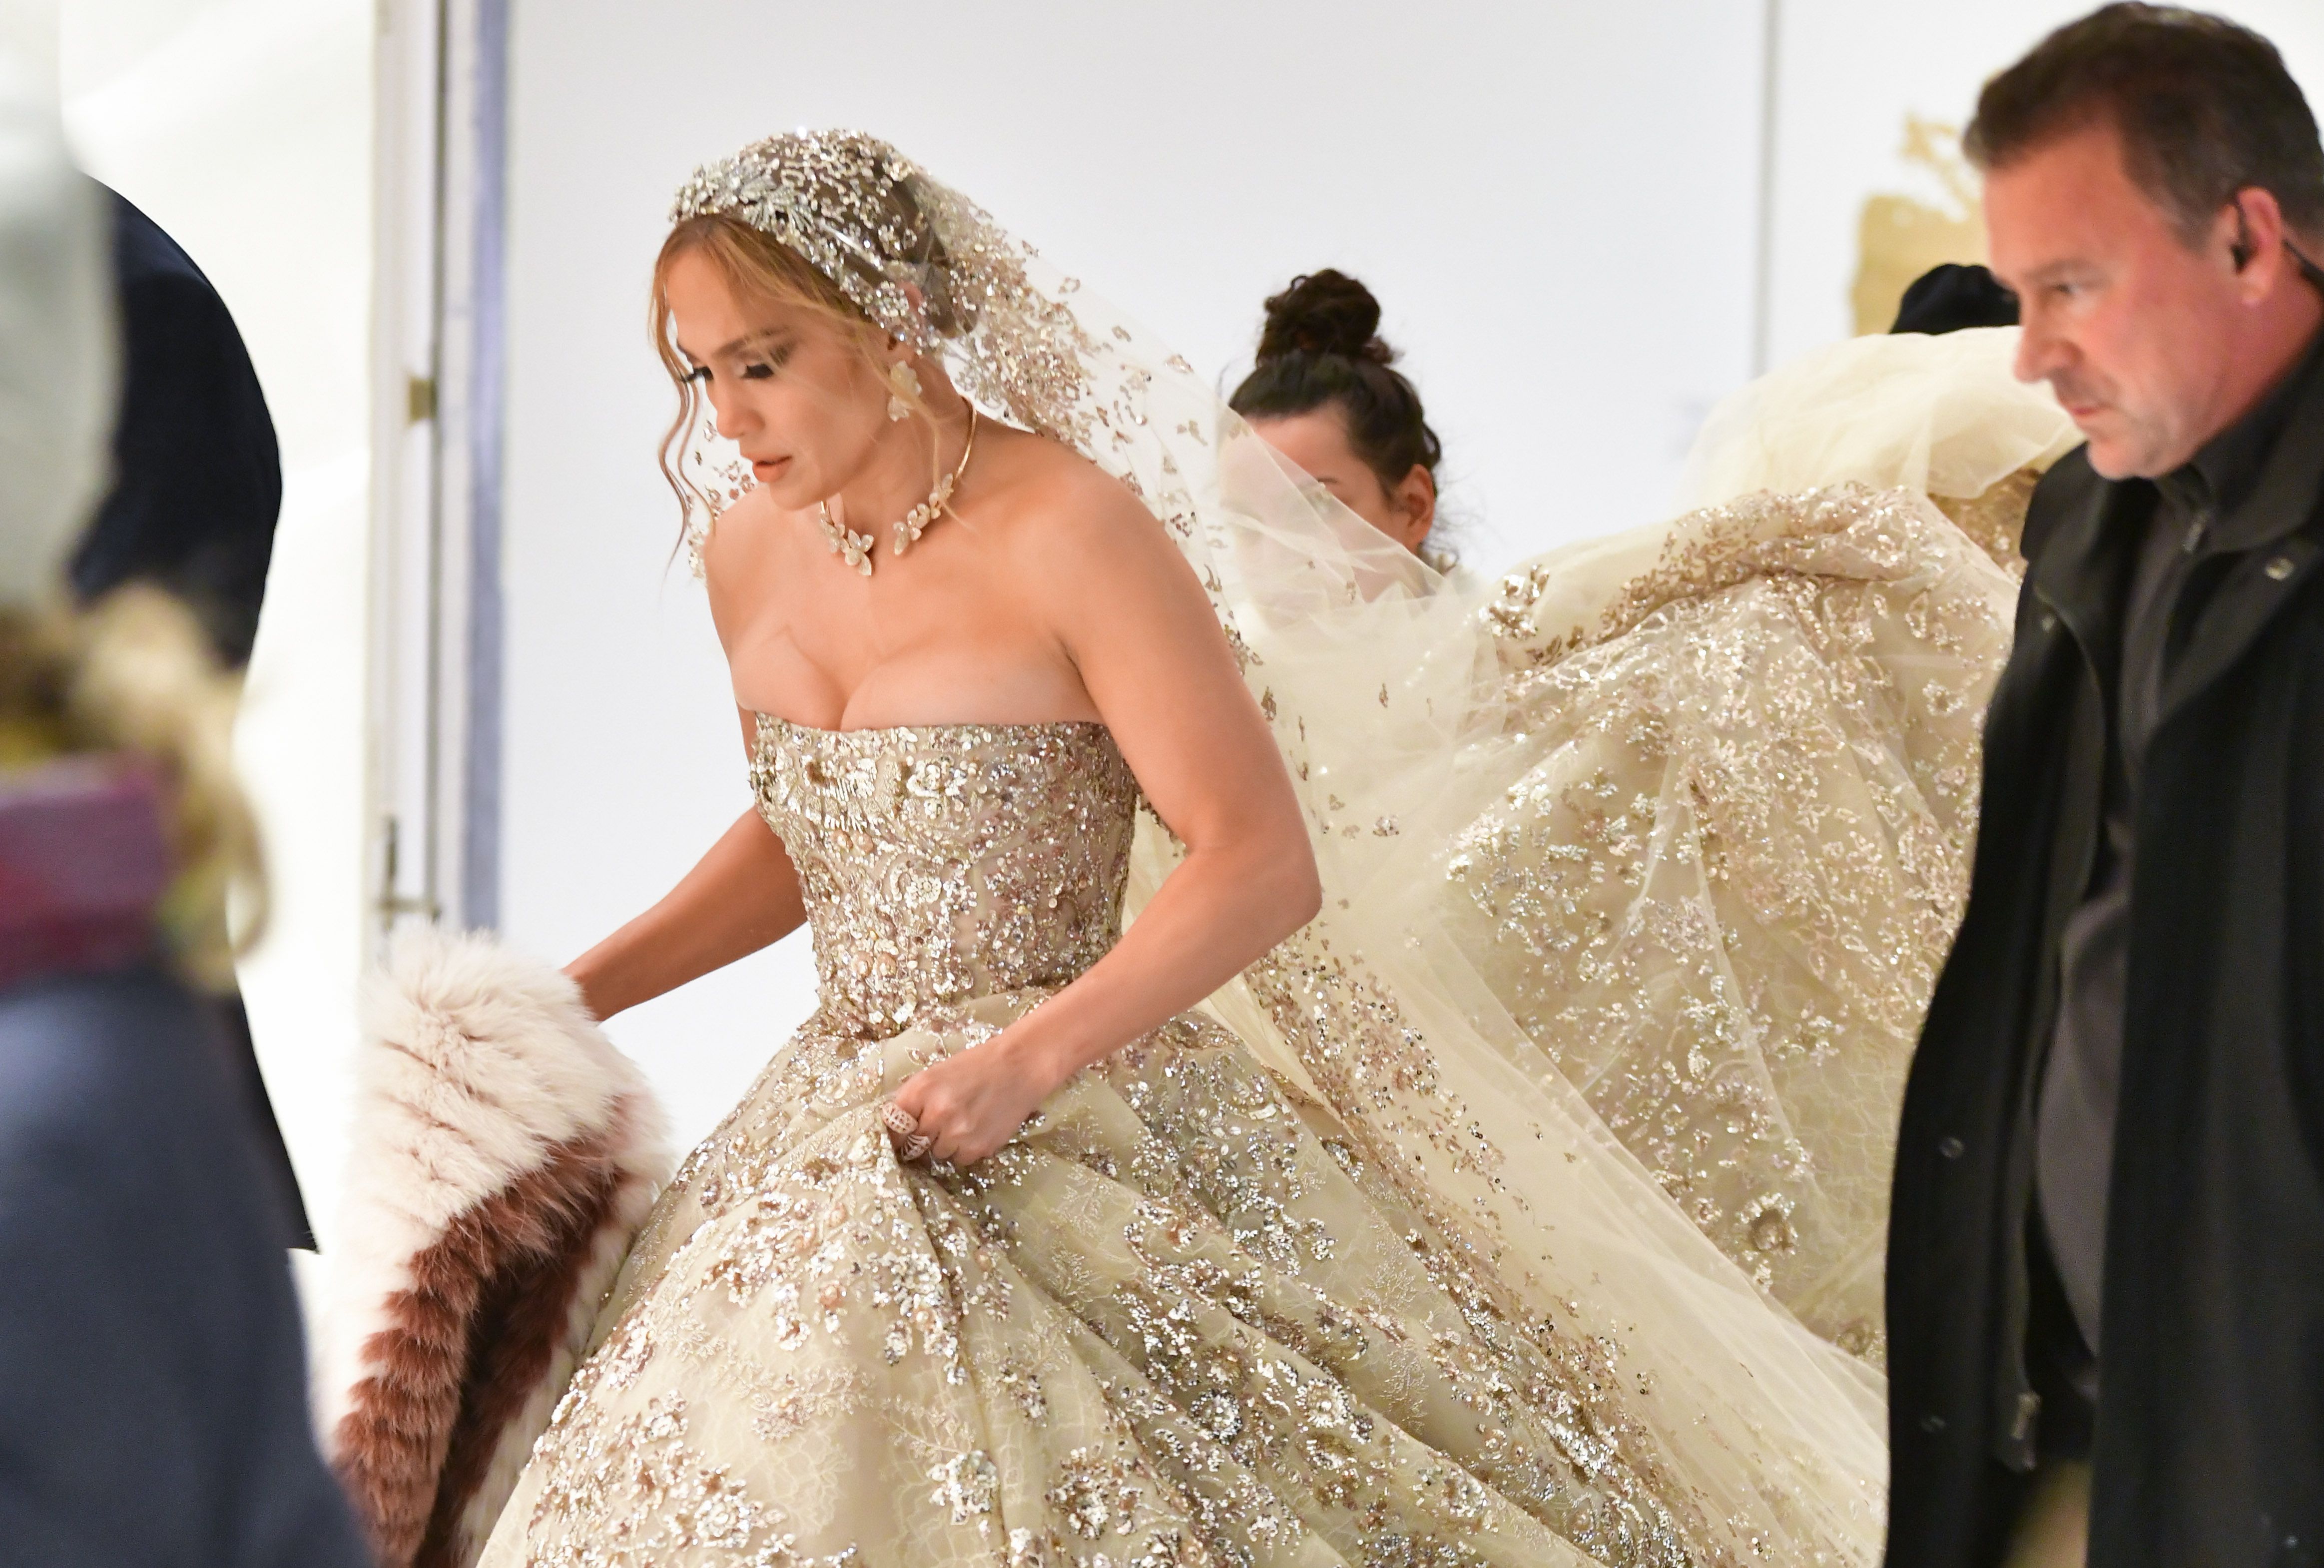 Jennifer Lopez drops jaws in wild wedding dress for 'Can't Get